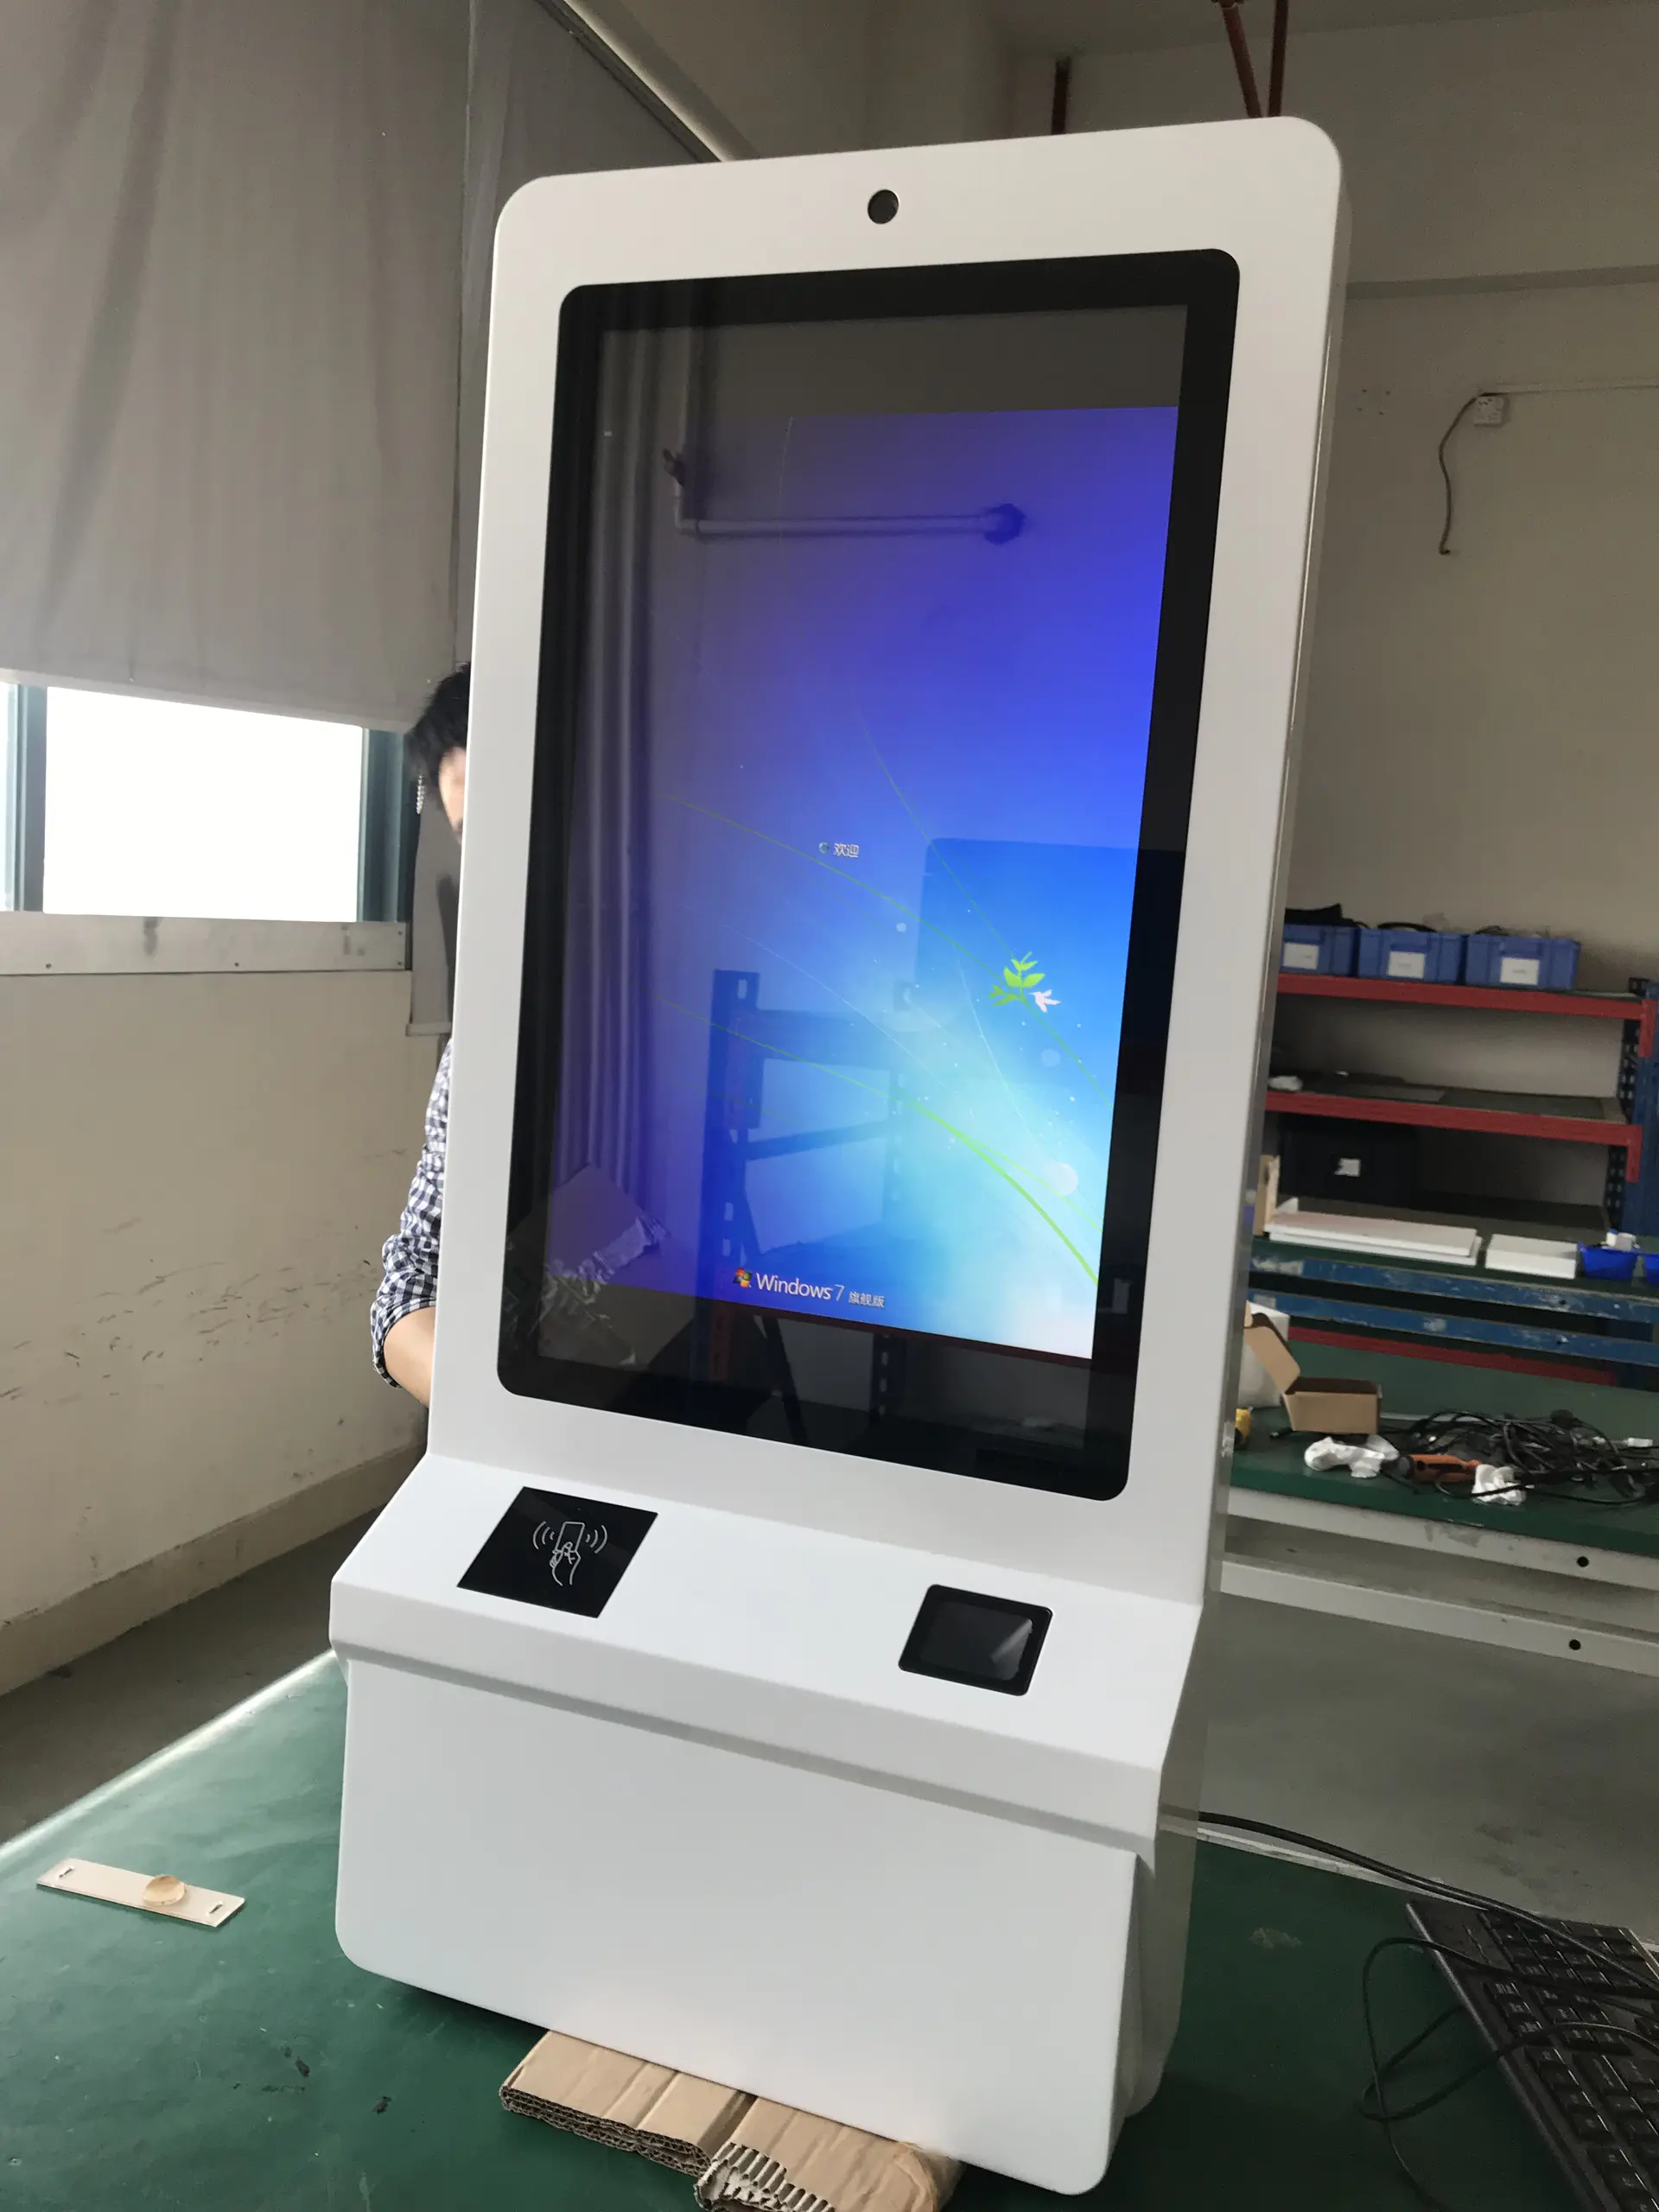 Manufacturer Price Interactive Touch Screen Wall Mounted Payment Kiosk